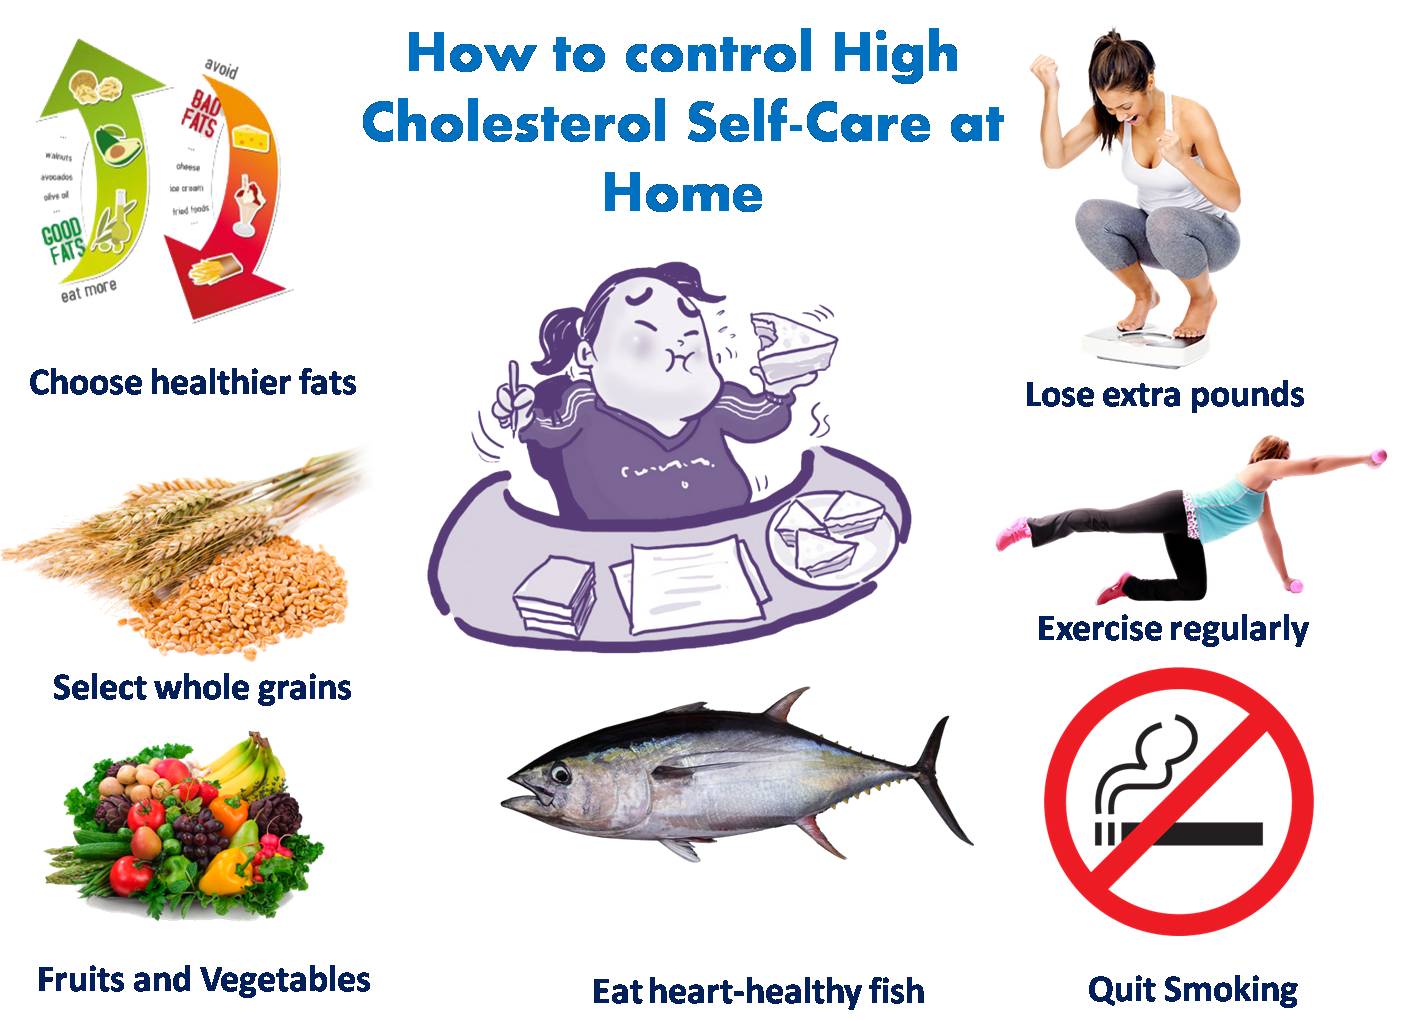 How to Control High Cholesterol Self-Care at Home